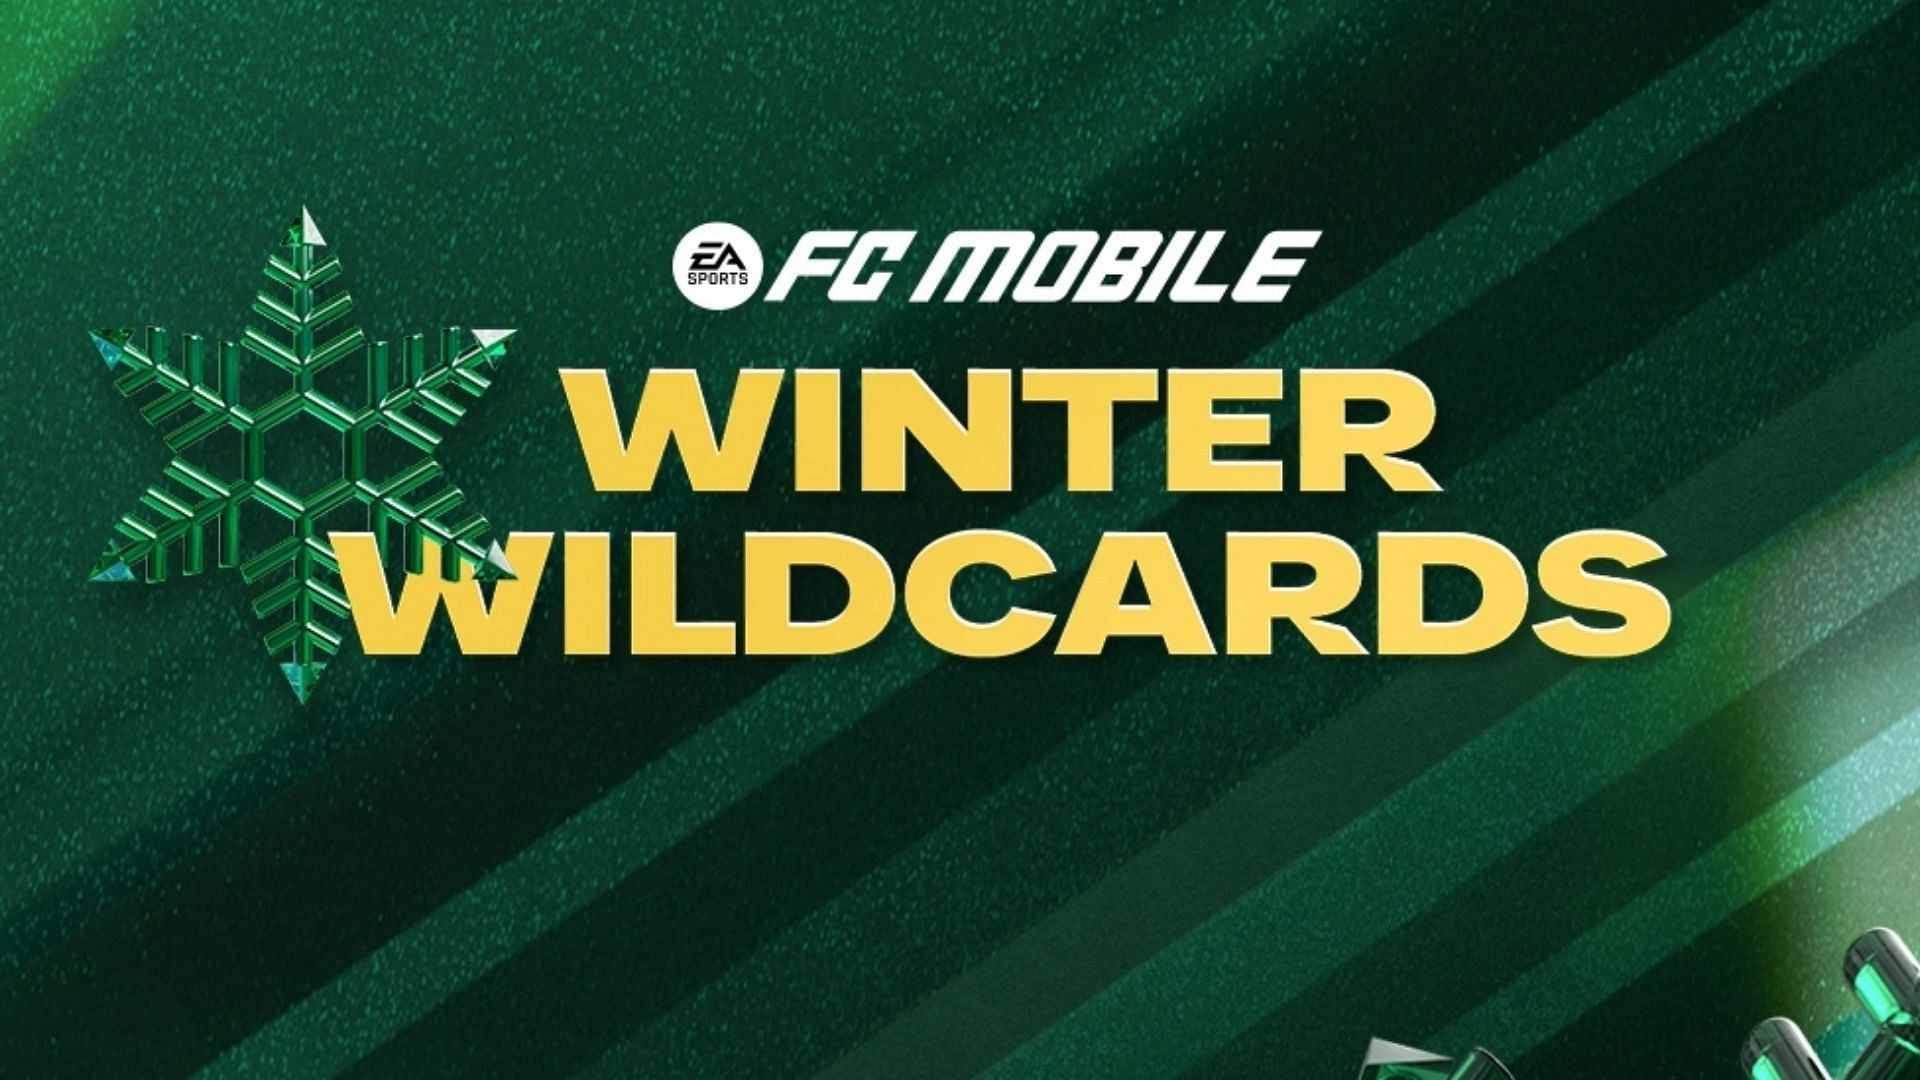 EA Sports announces Winter Wildcards in FC Mobile led by Rijkaard and Blanc